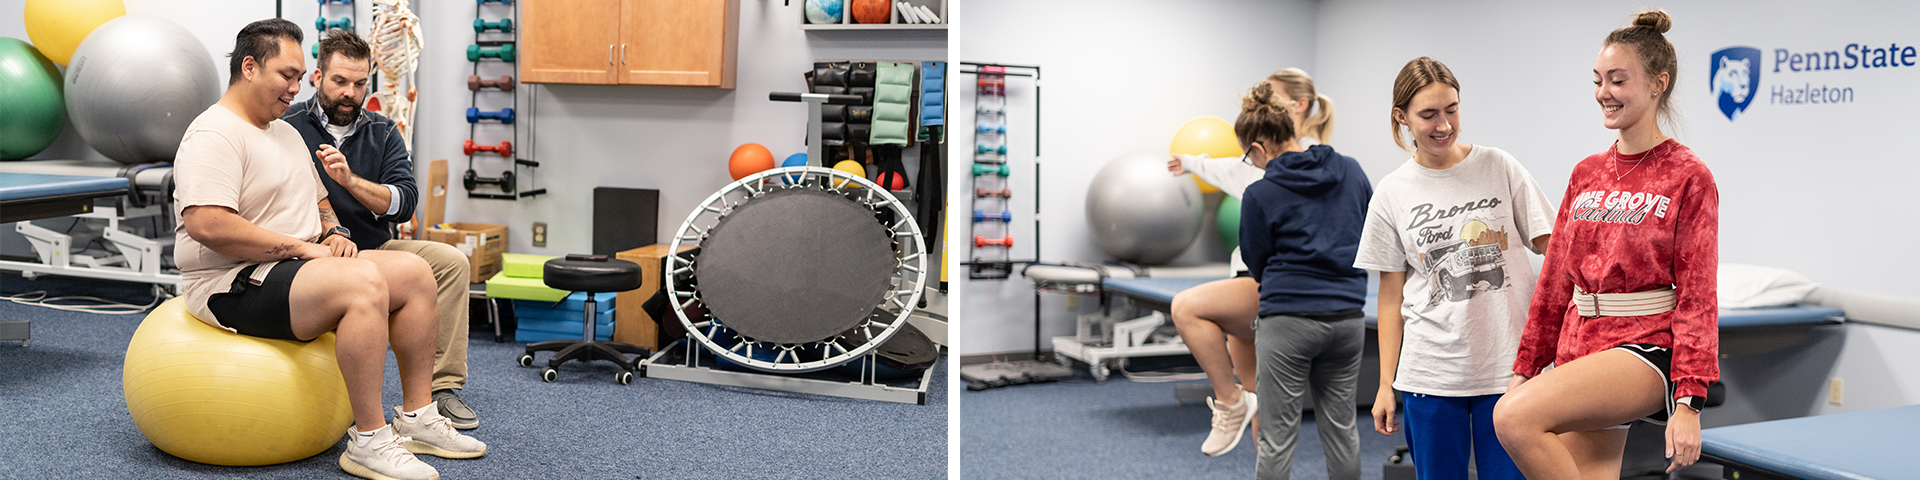 There are two photos. On the left, an instructor working with a student who is sitting on a yellow medicine ball surrounded by Physical Therapy equipment. On the right, there are two female students in the foreground practicing balancing exercises with two other students doing similar work in the background. 